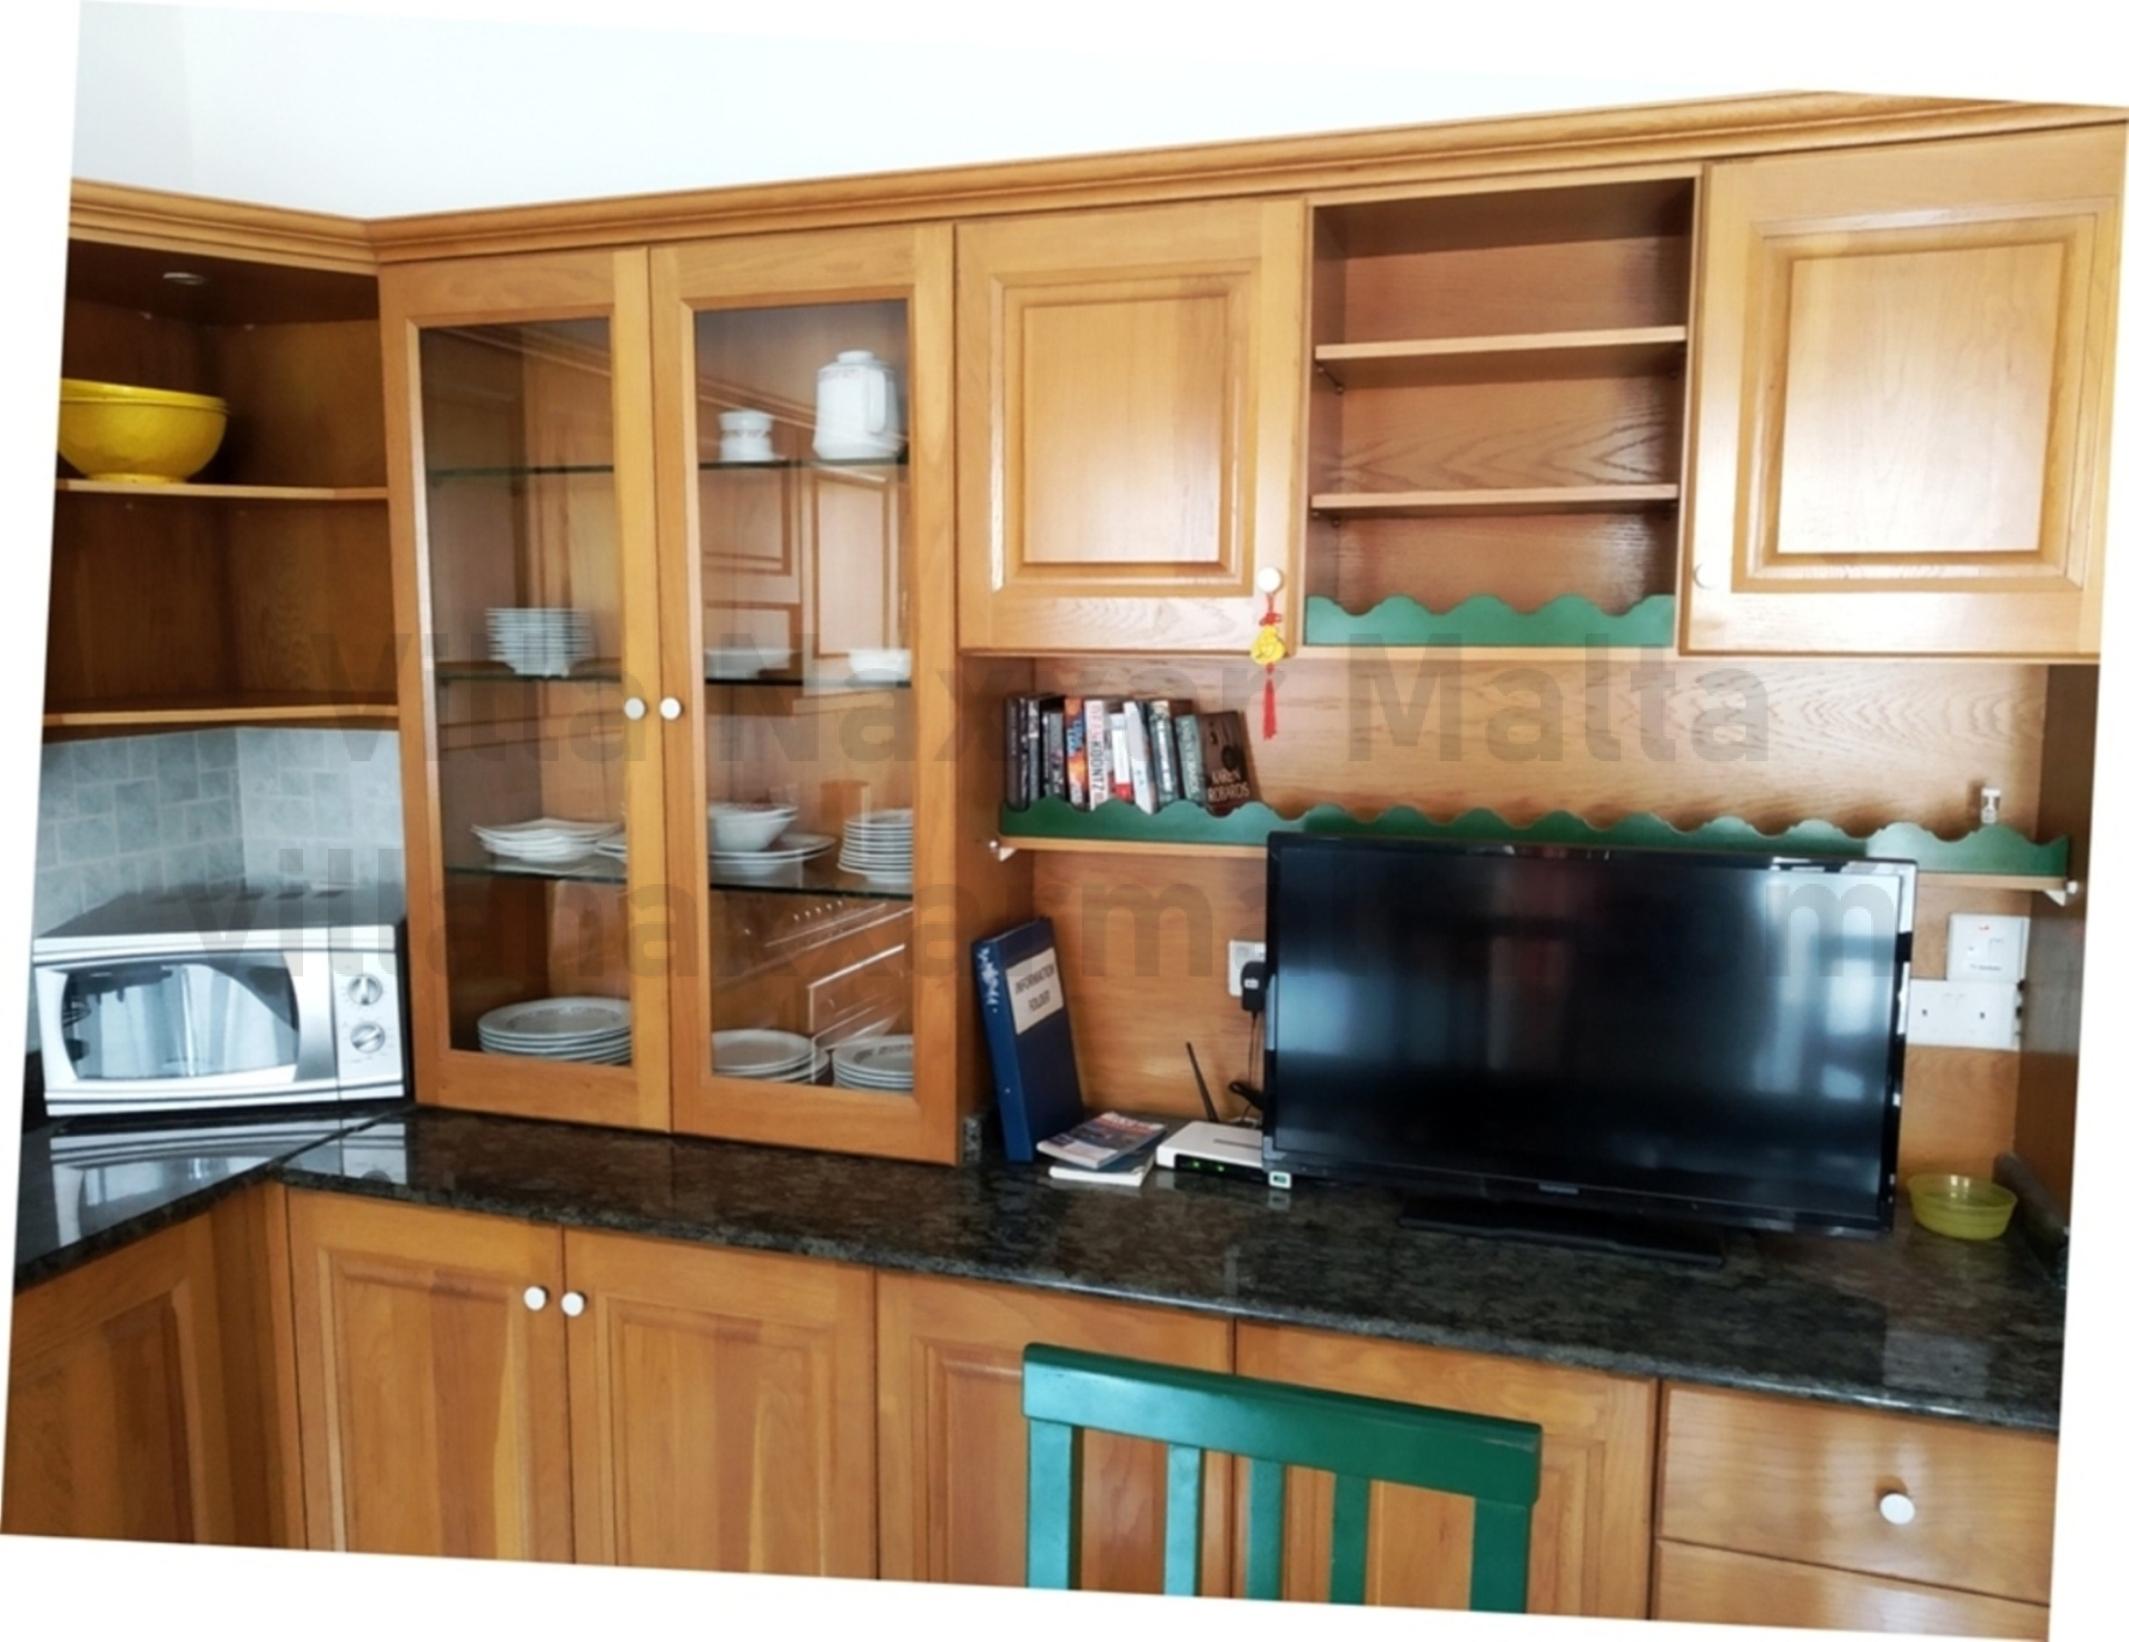 Villa Naxxar Malta – Kitchen, Dining and Living including oven/stove, microwave, dishwasher together with all the required cooking essentials, AC, WIFI and more